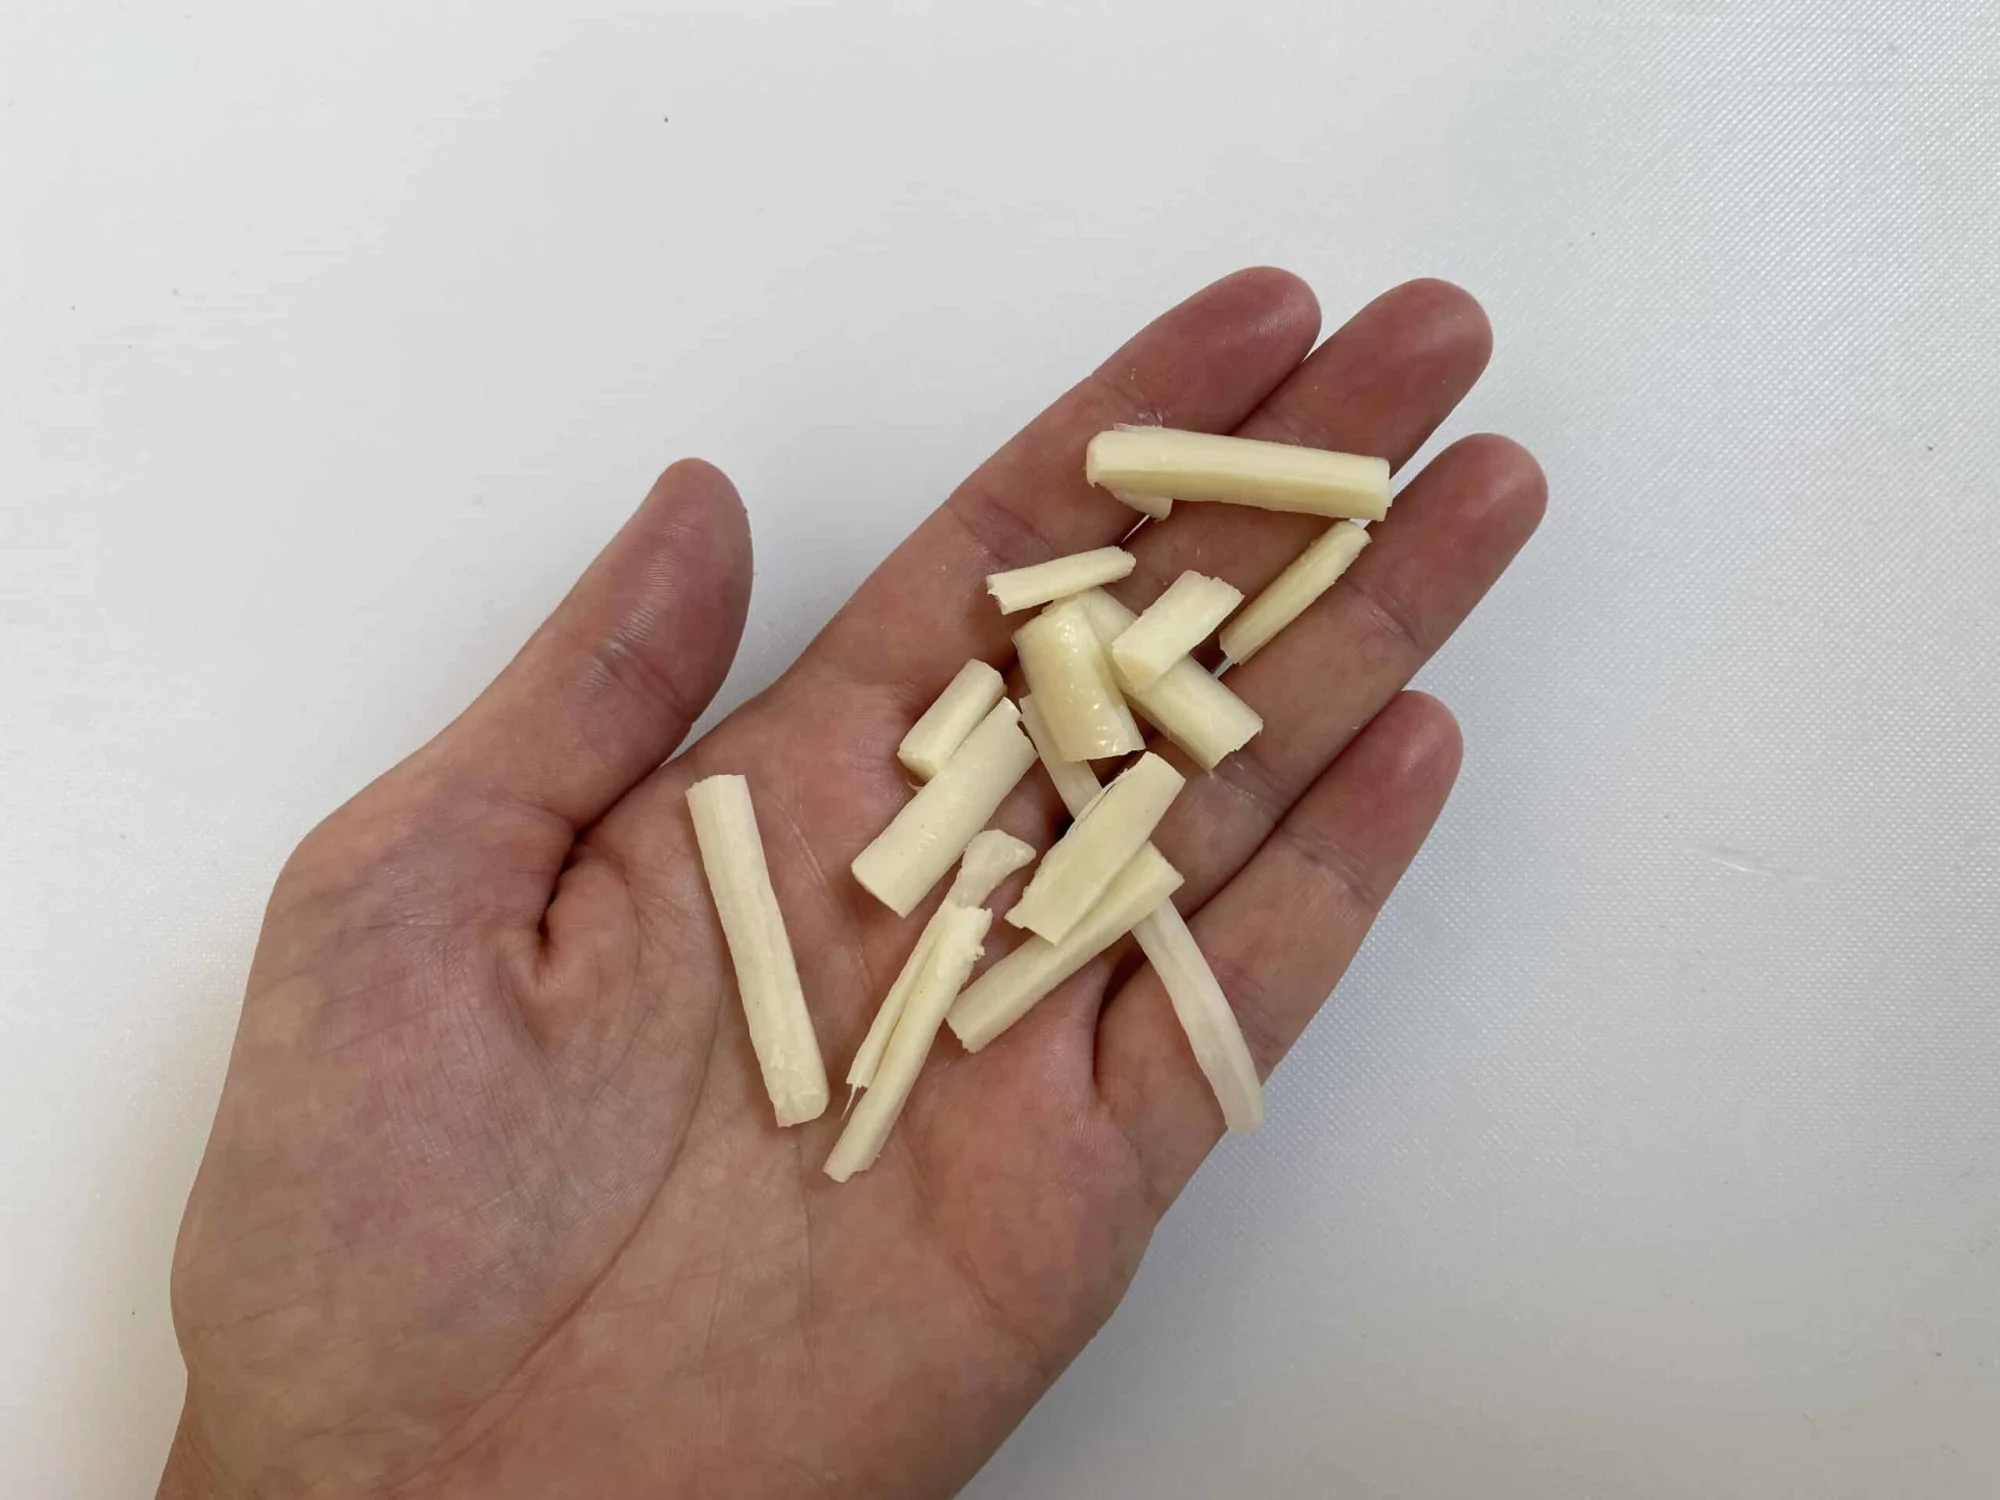 a hand holding a small pile of string cheese pieces (made by pulling the cheese into thin strands and then pulling the strands into small pieces)